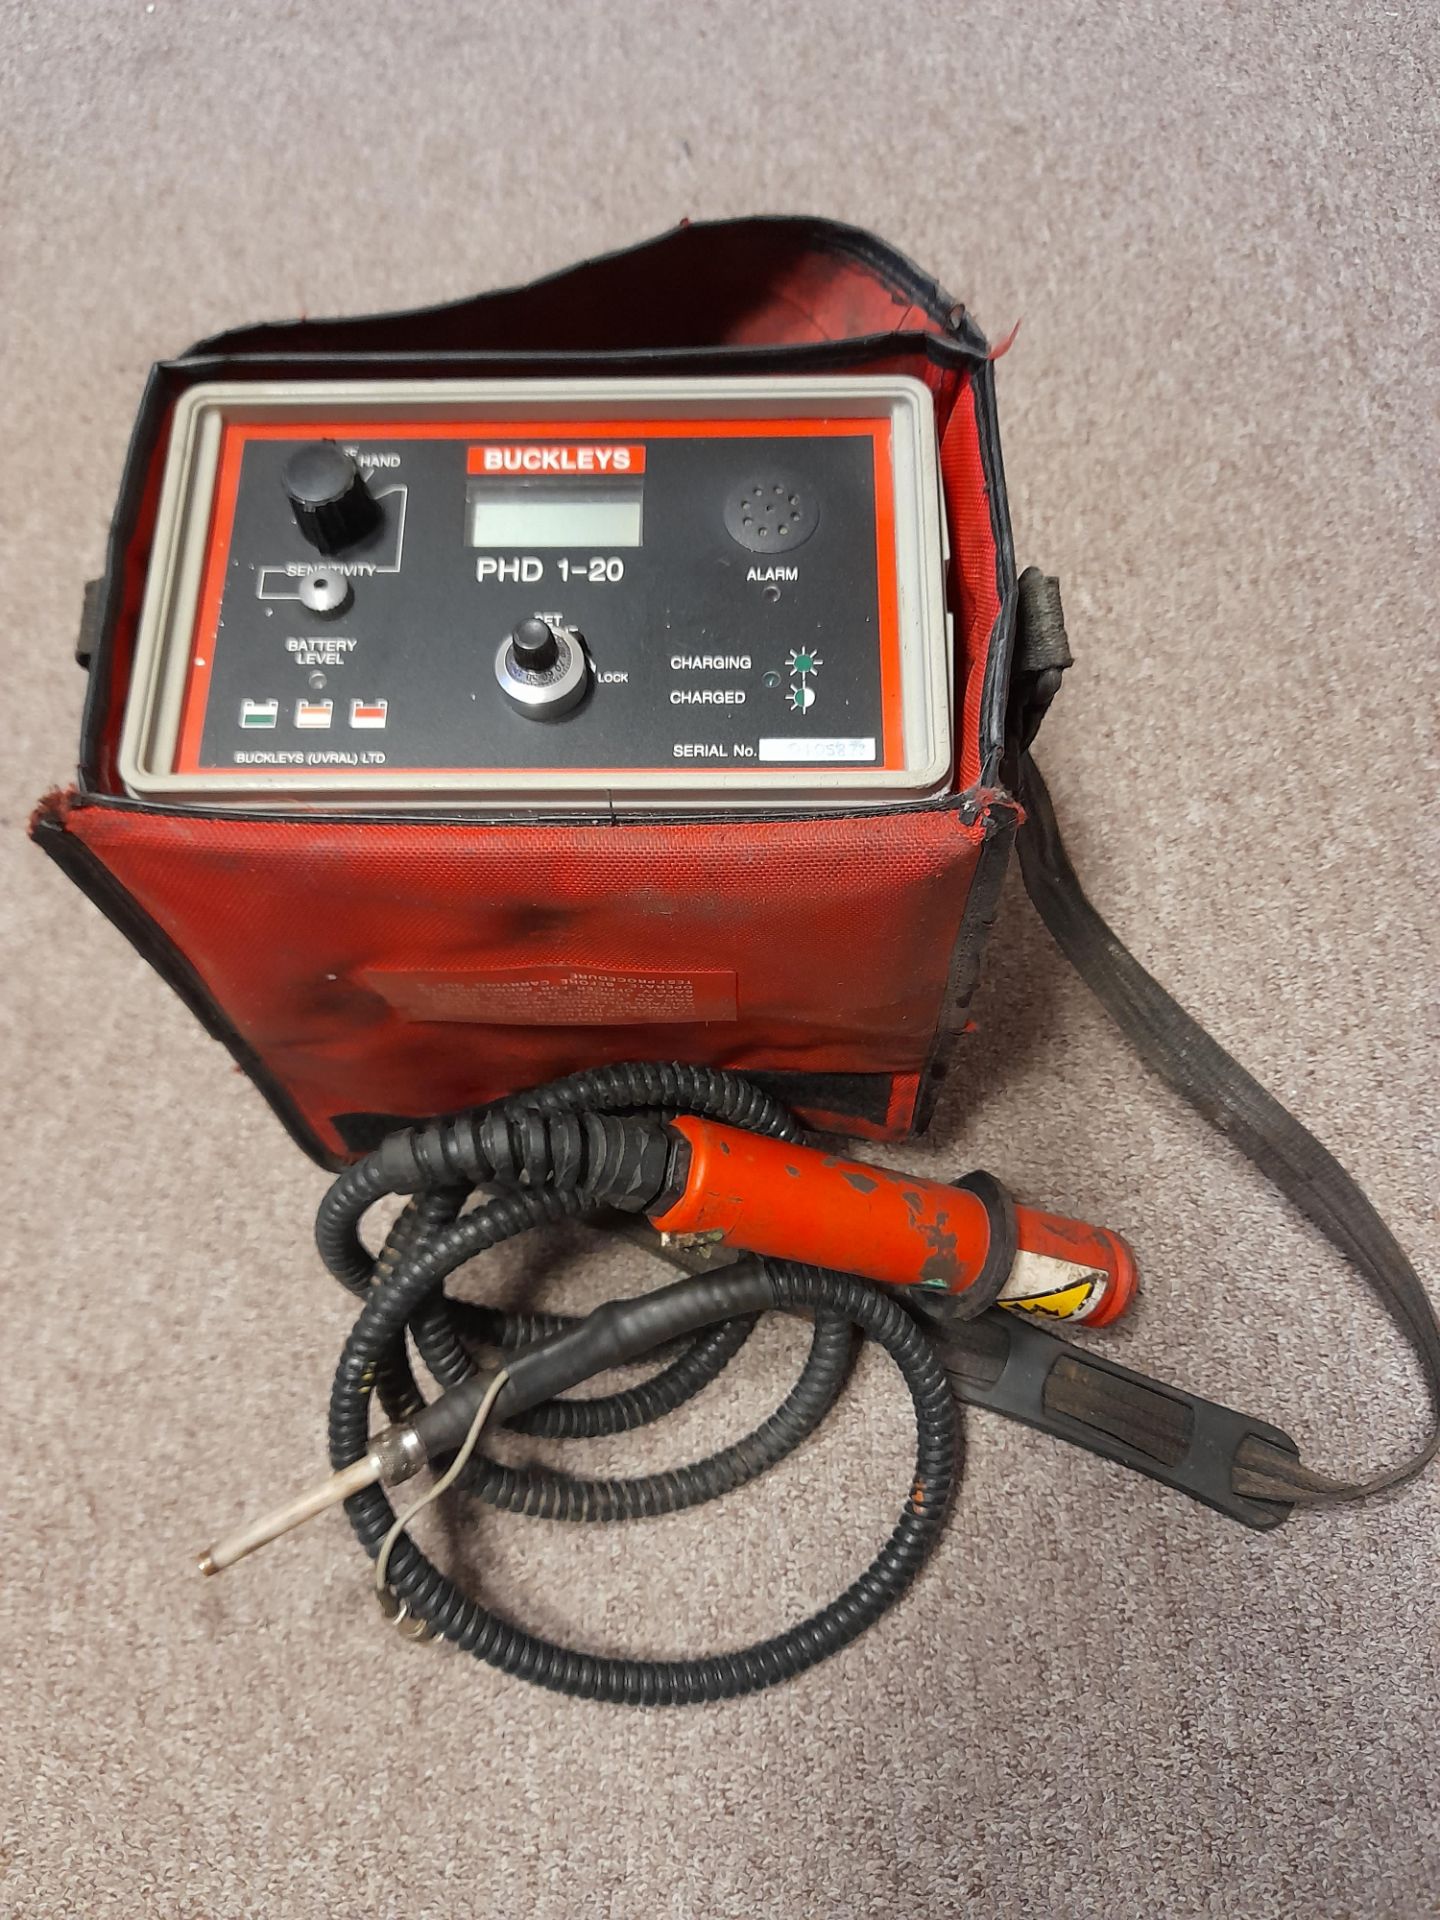 Buckley DHD 1-20 Pinhole Detector - Location Stockport